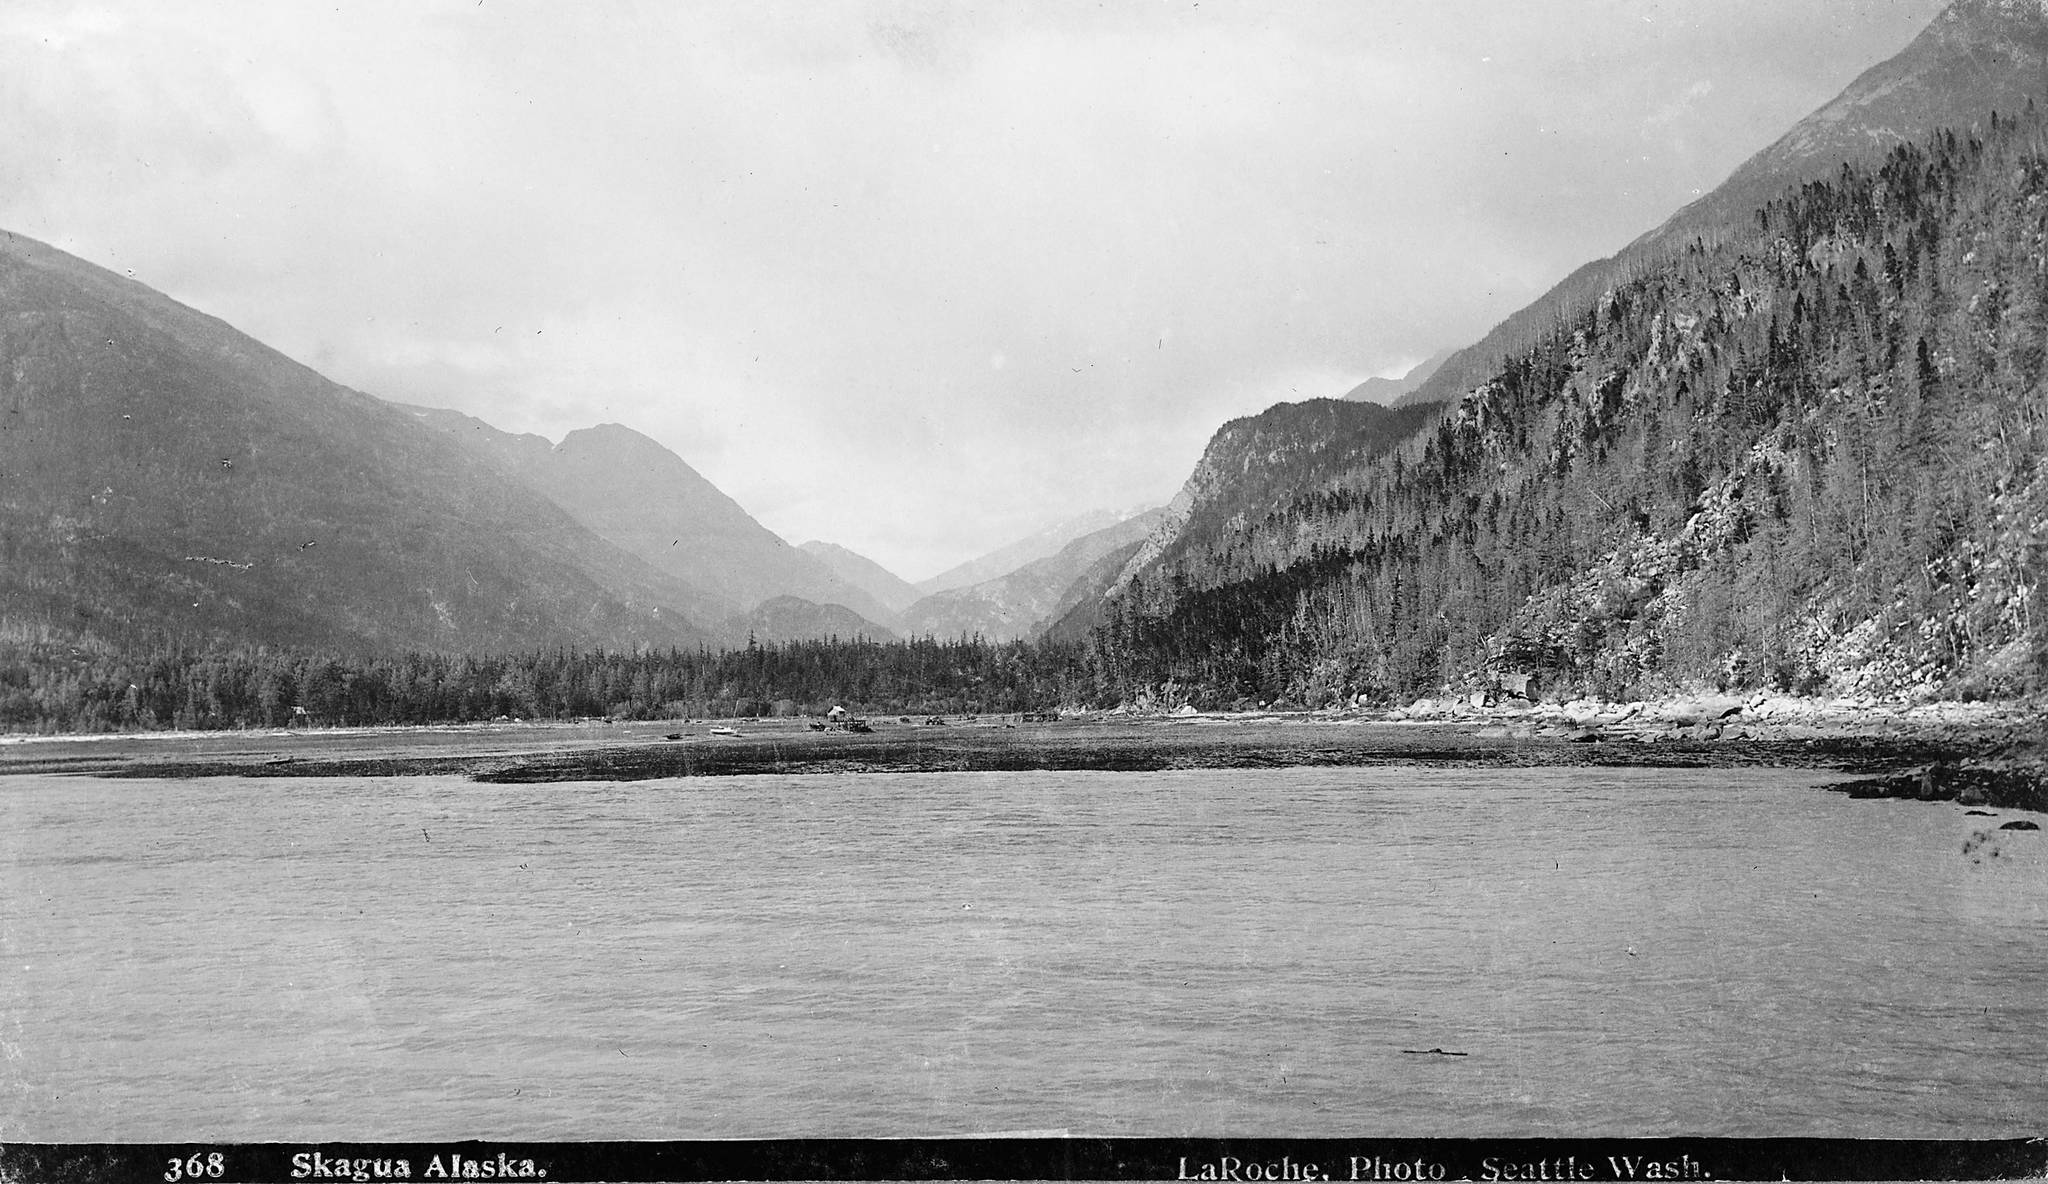 The view of Skagway from the deck of the steamer Queen on July 26, 1897. Image courtesy of the Klondike Gold Rush National Historical Park, KLGO SE-9-8799.